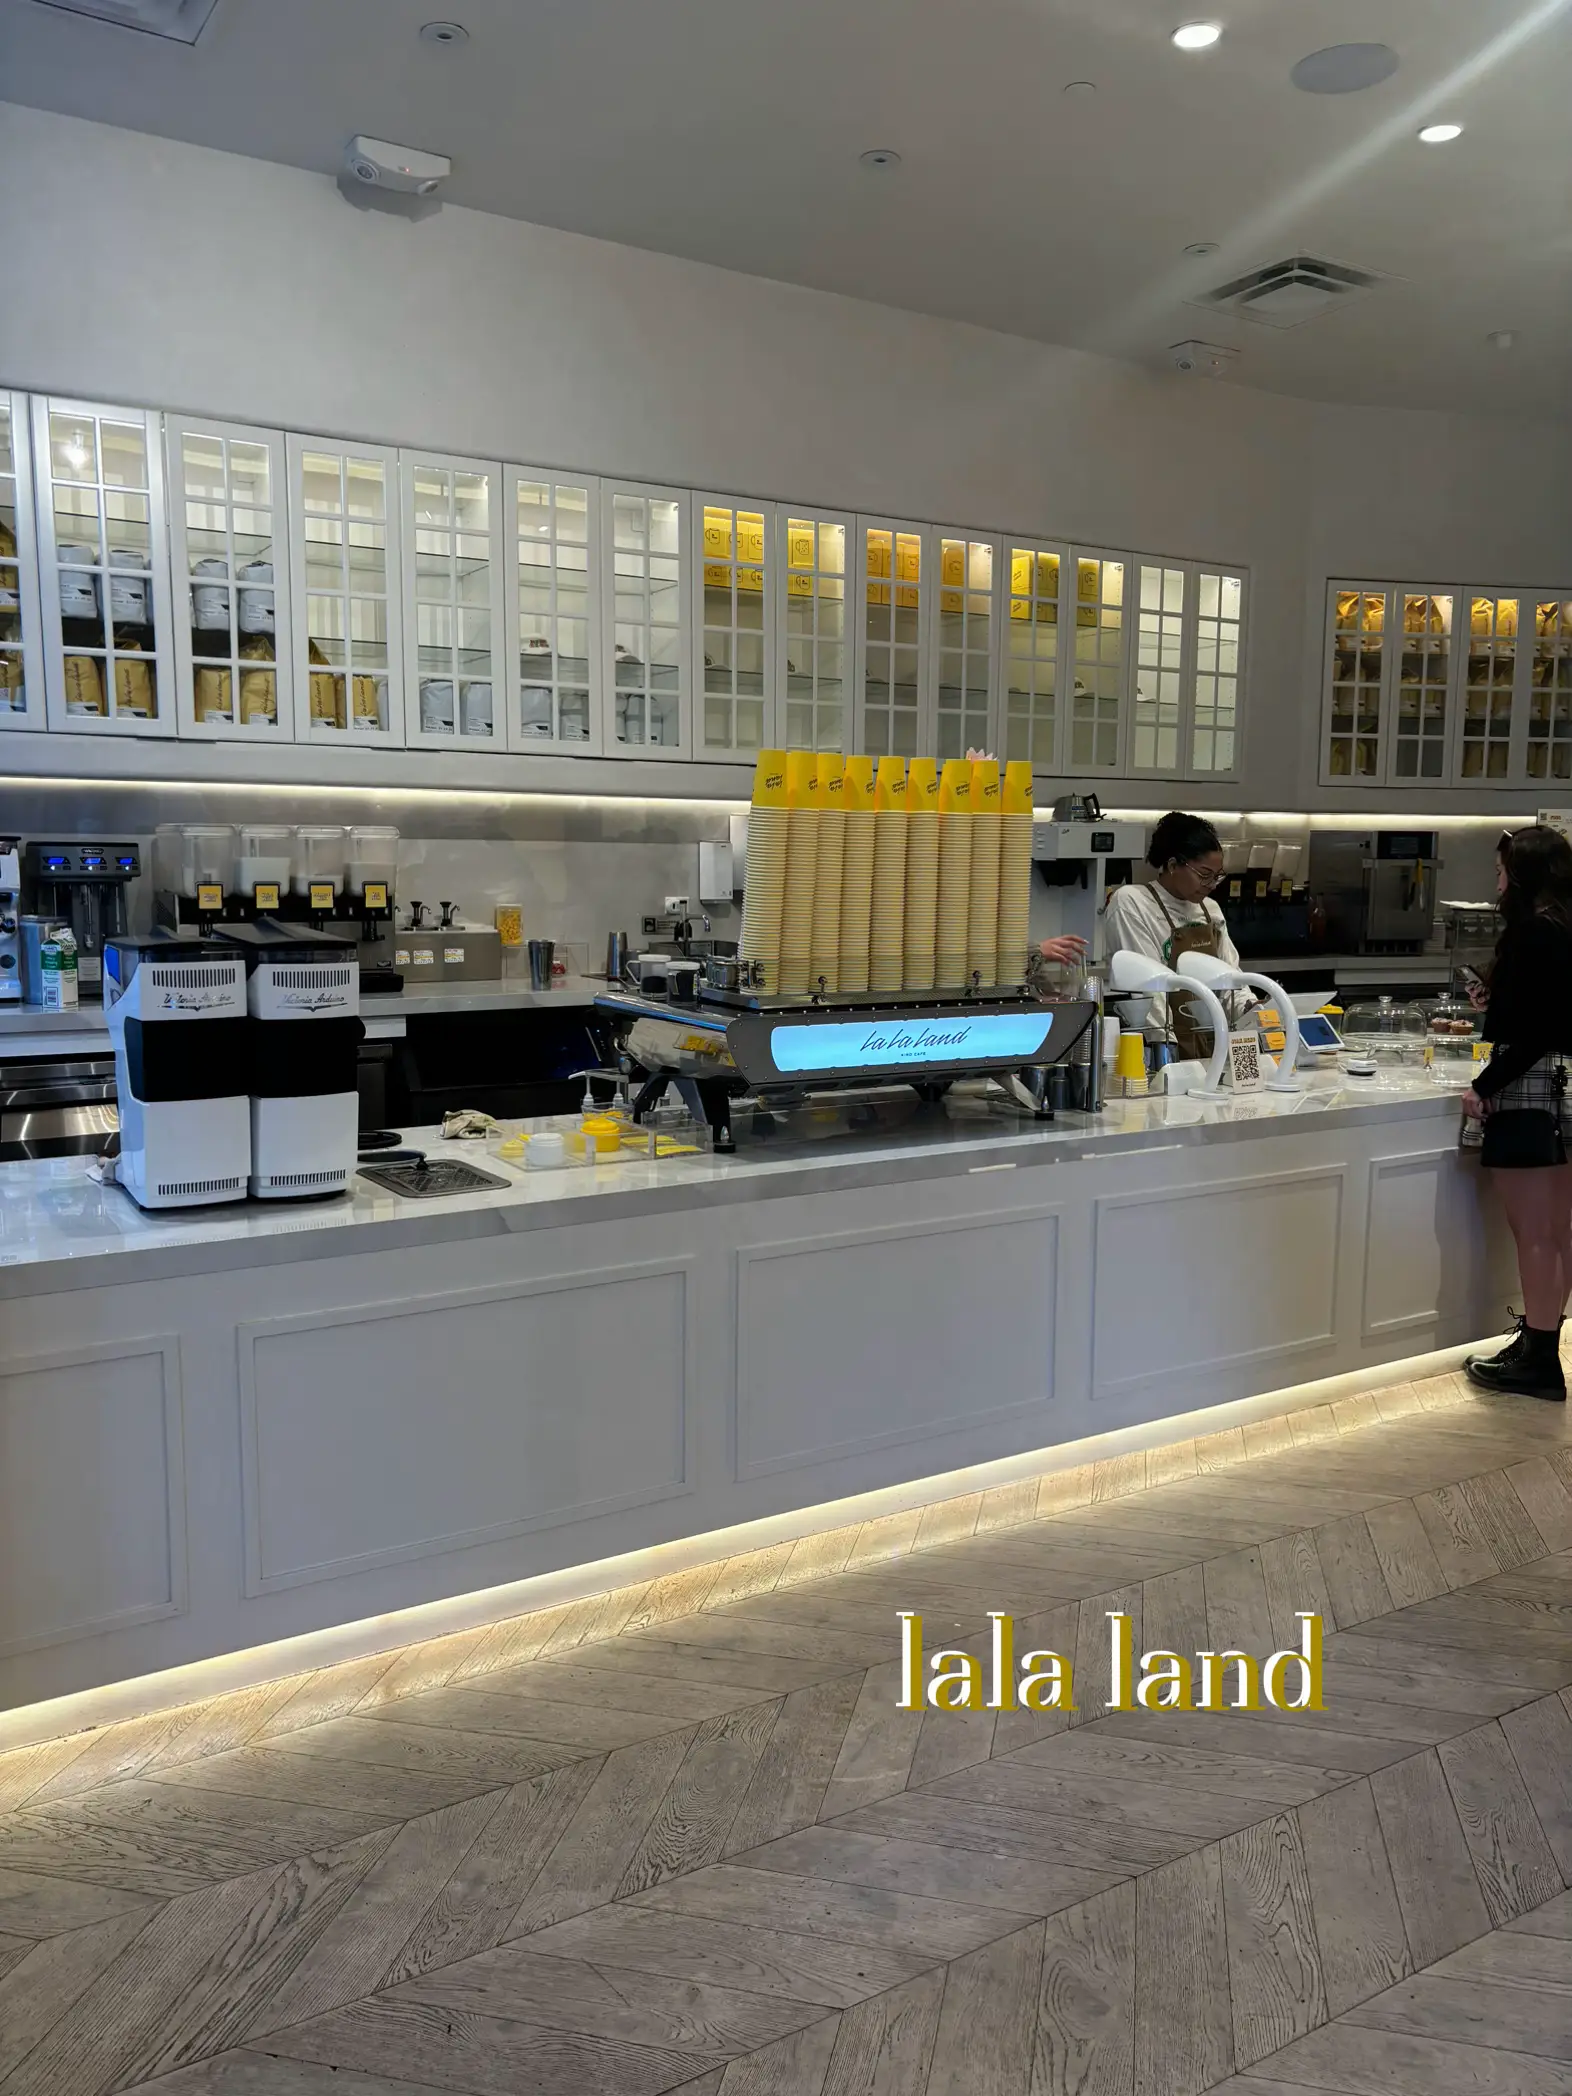  A restaurant with a man standing at the counter and a woman sitting at a table. The restaurant has a large menu board and a La Land sign.